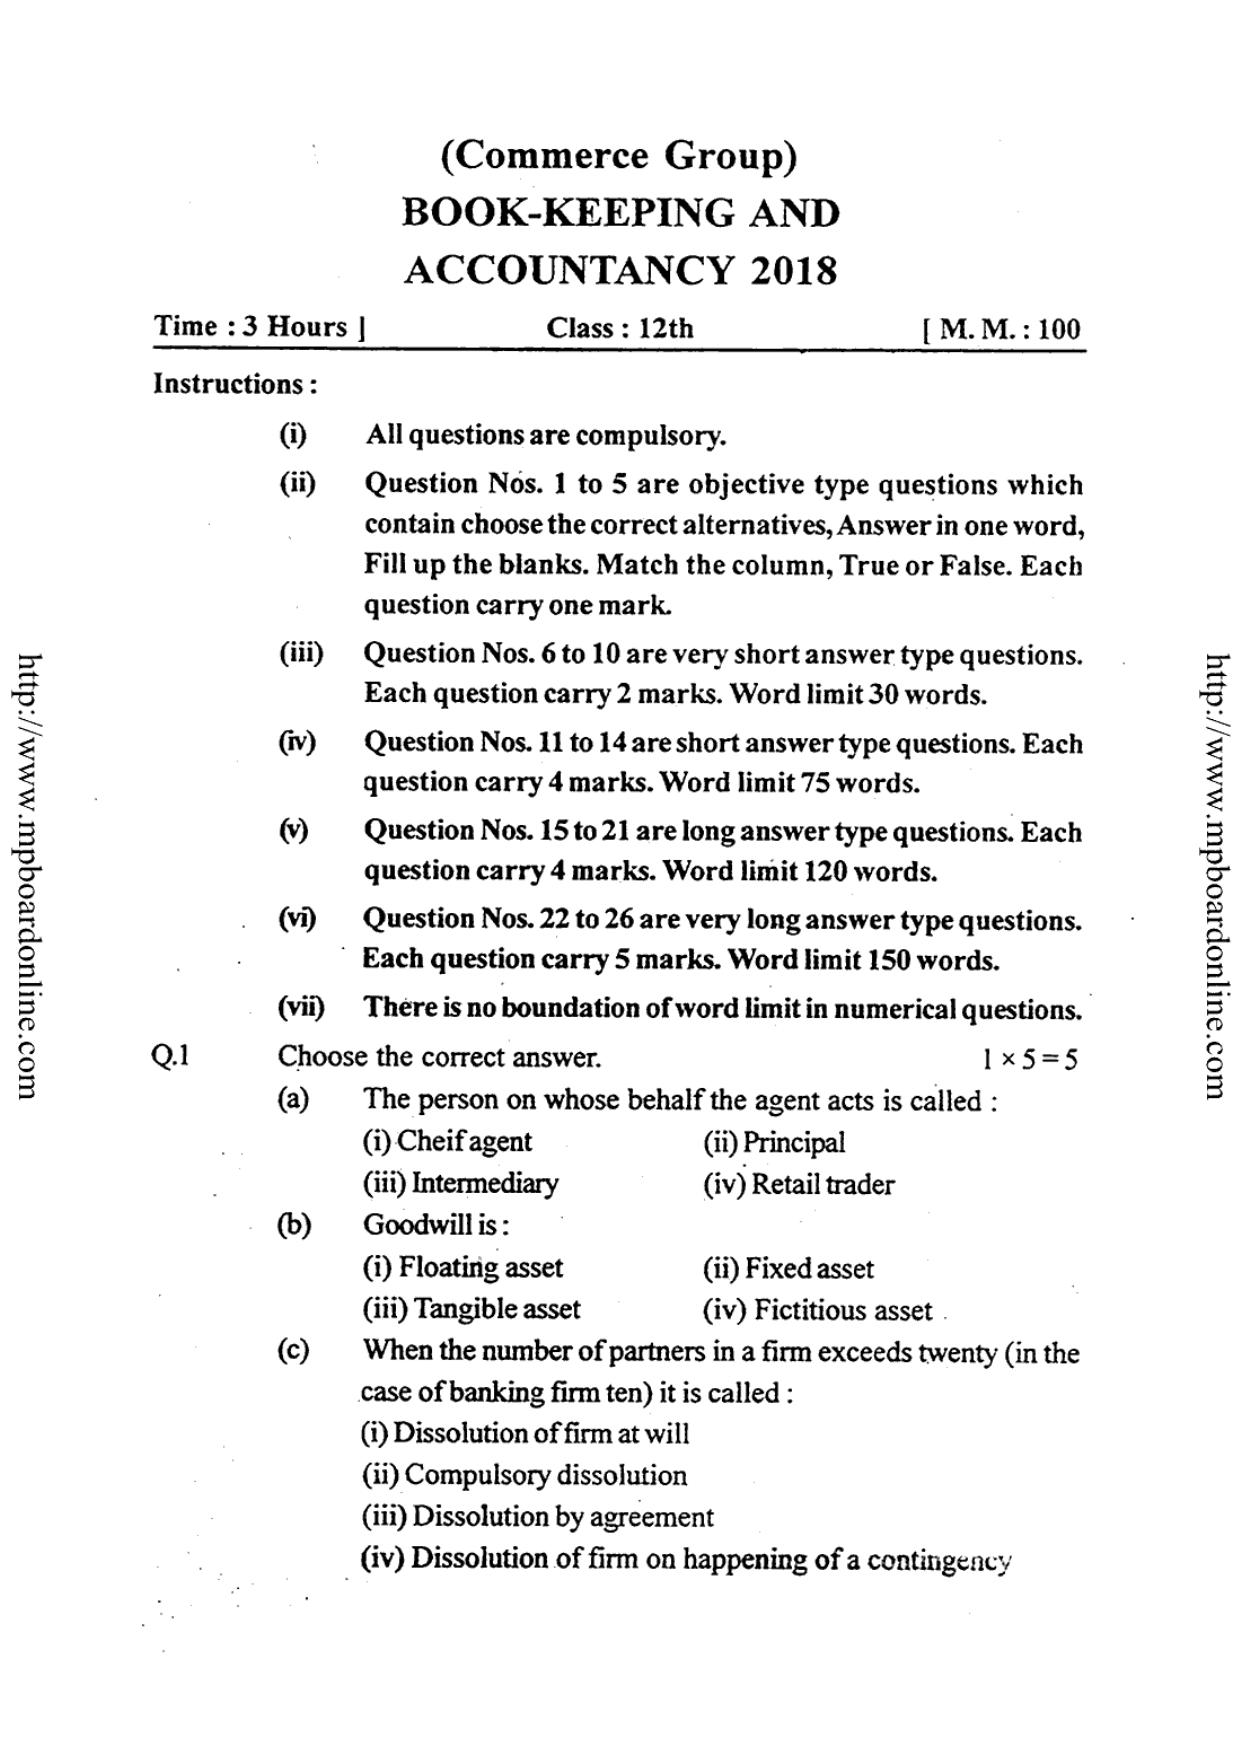 MP Board Class 12 Book Keeping And Accountancy 2018 Question Paper - Page 1